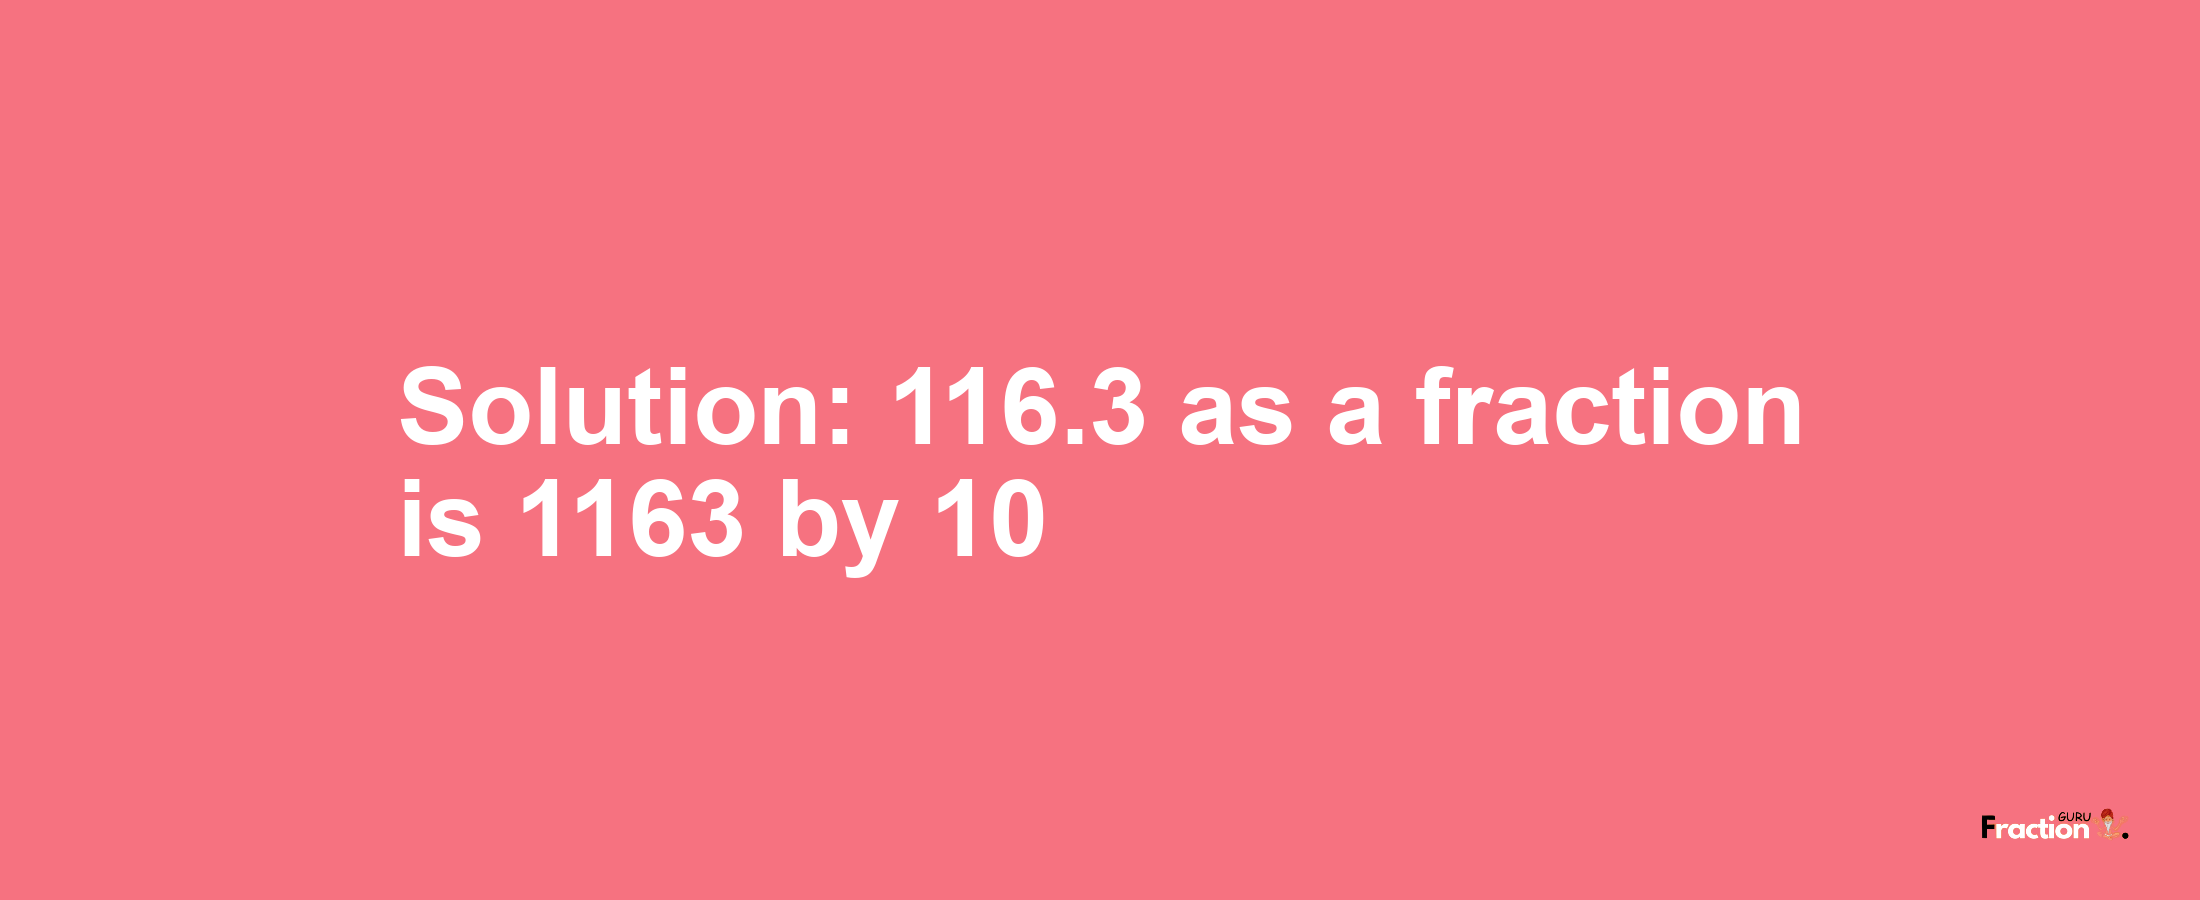 Solution:116.3 as a fraction is 1163/10